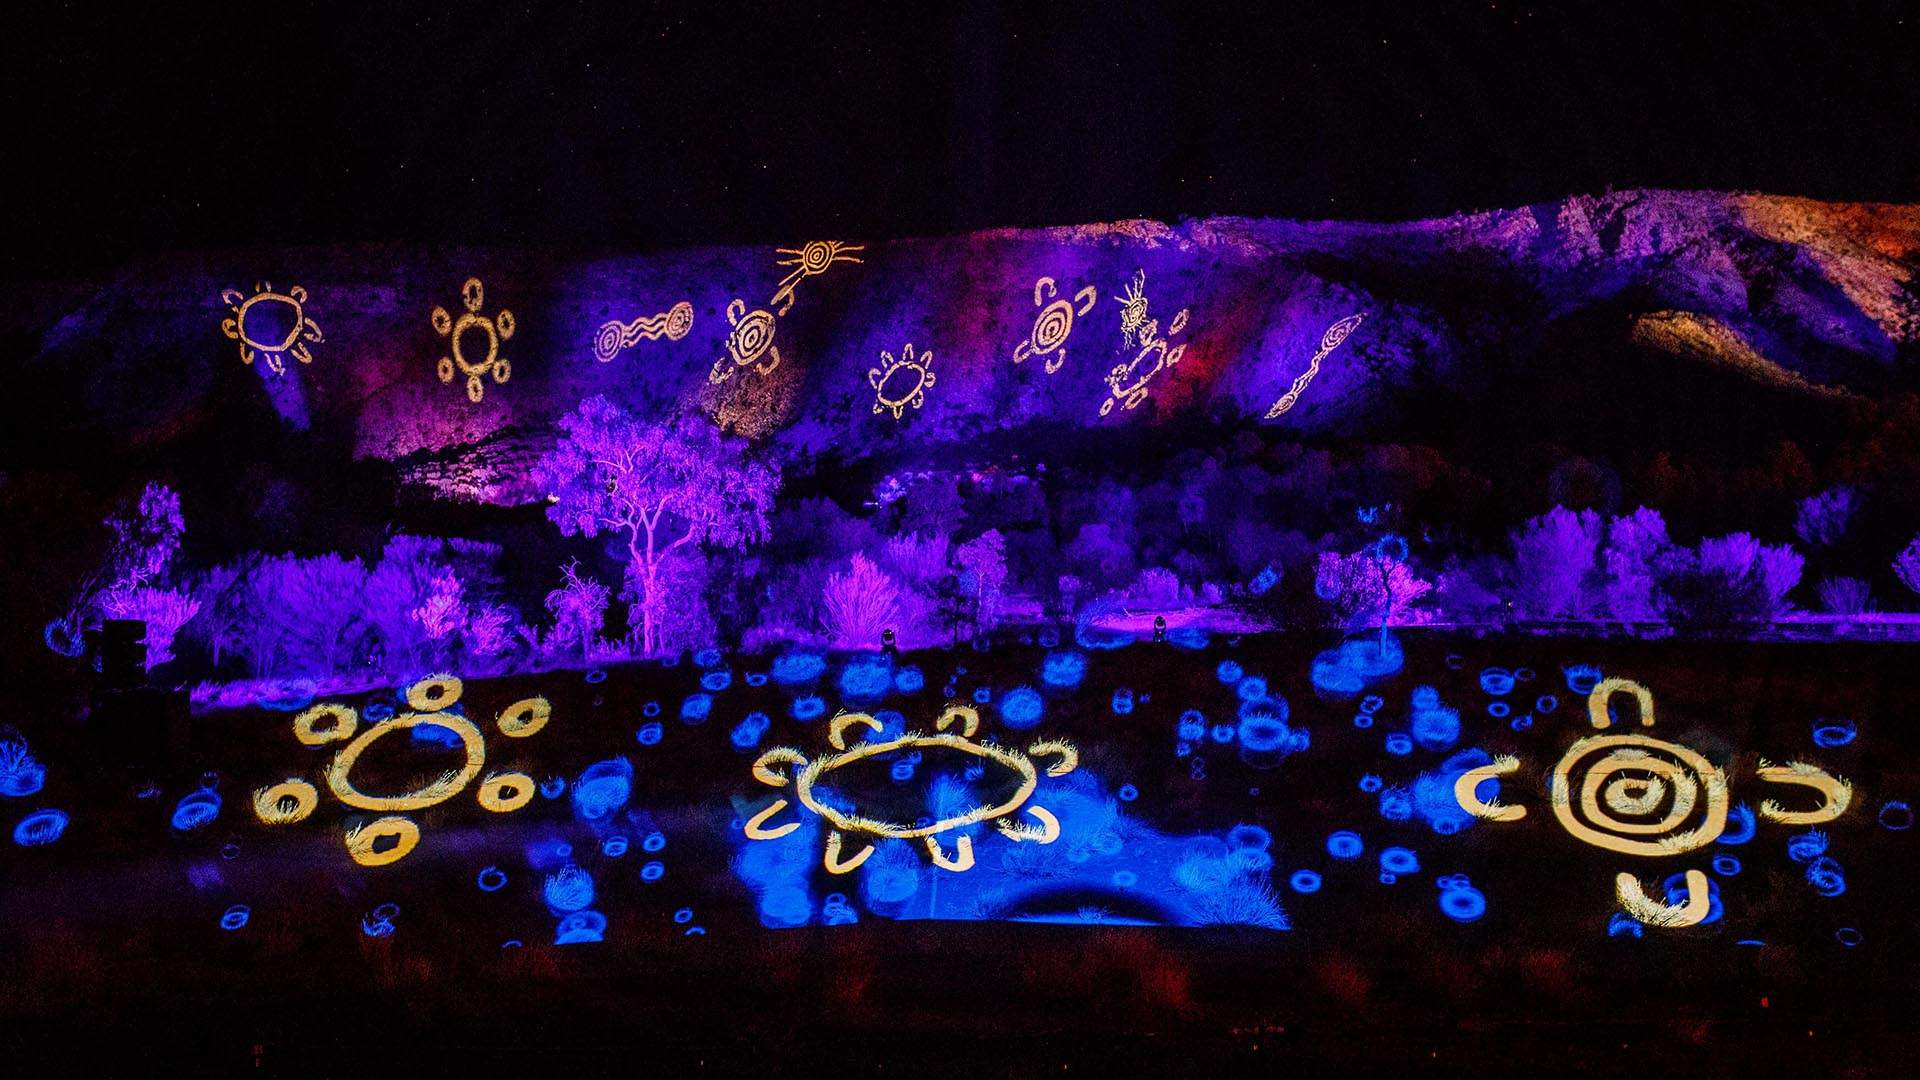 Parrtjima Festival Is Currently Lighting Up Alice Springs with Seven Epic Light Installations